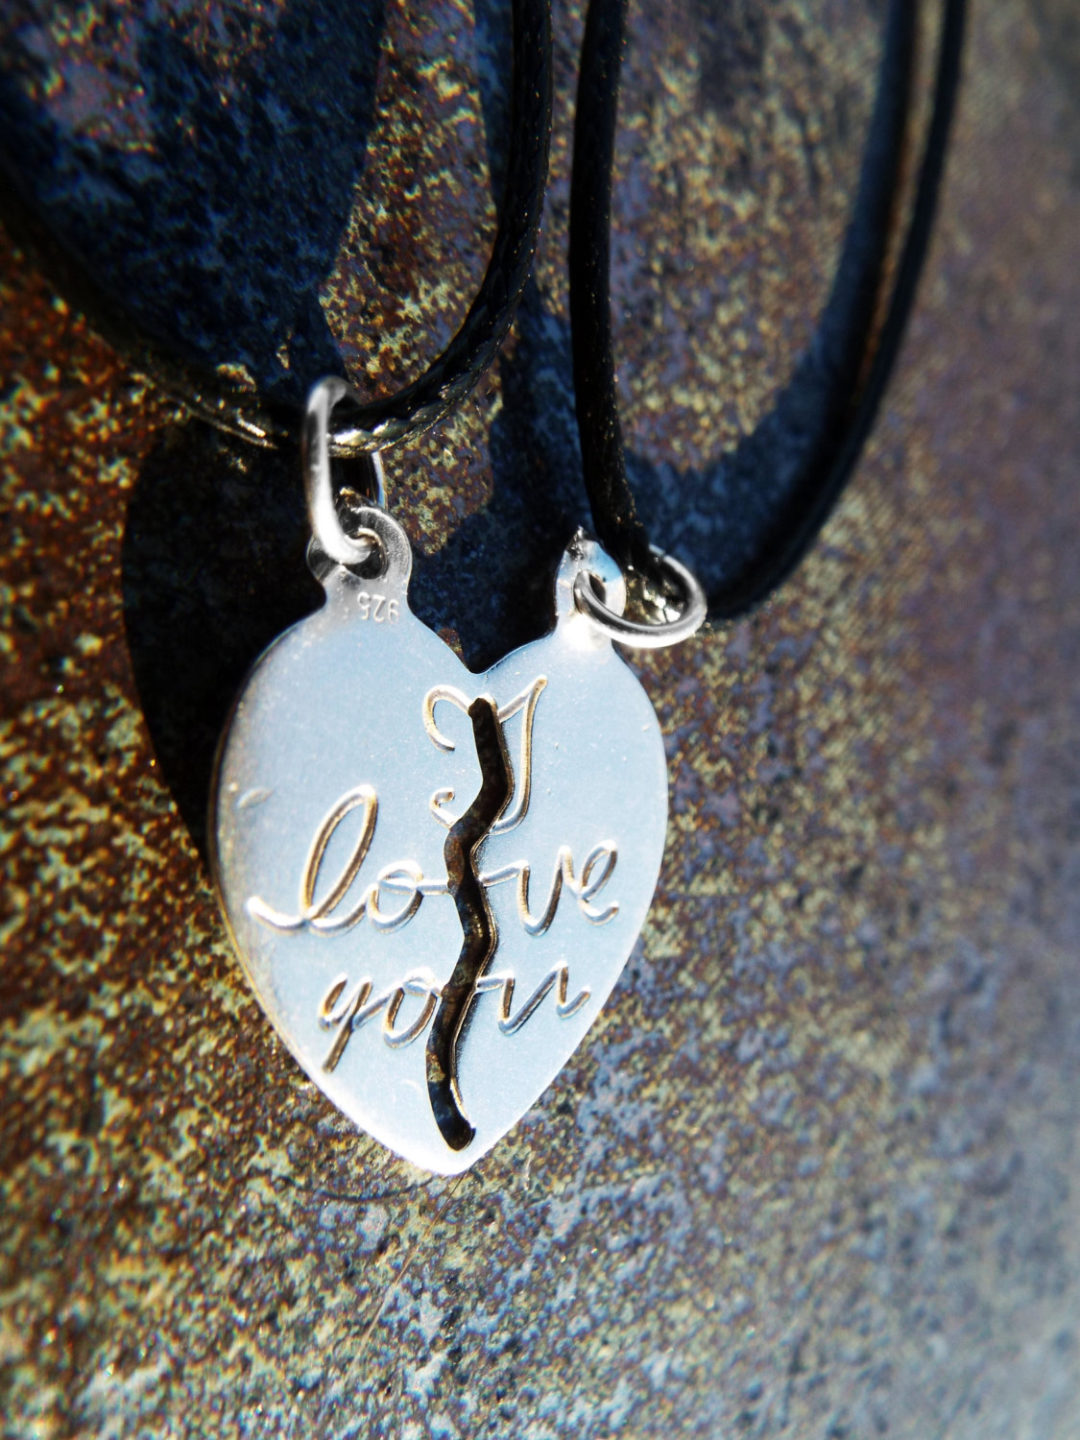 heartbeat necklace silver